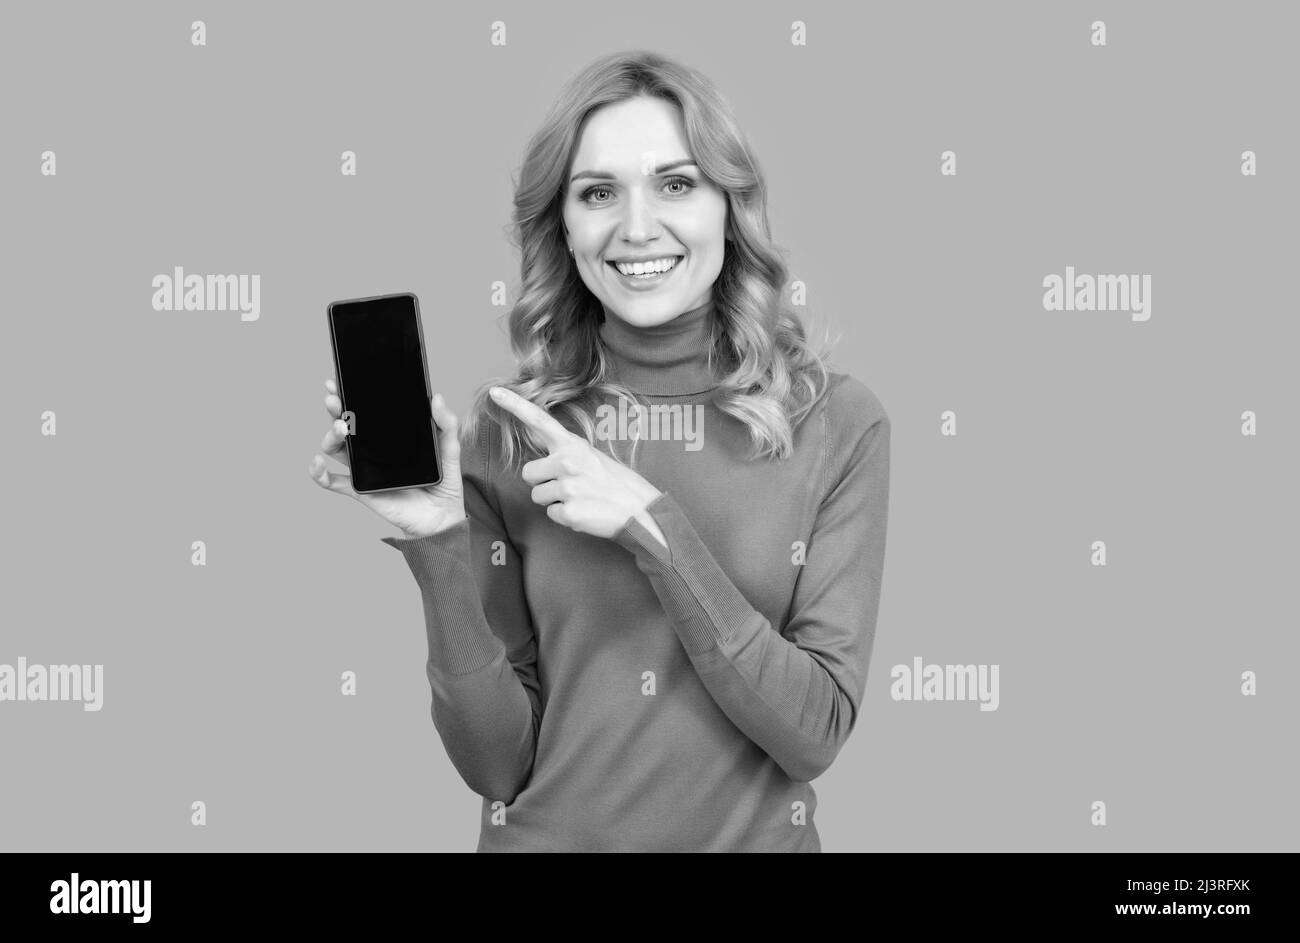 Woman point finger at blank mobile phone screen grey background copy space, advertising smartphone. Stock Photo